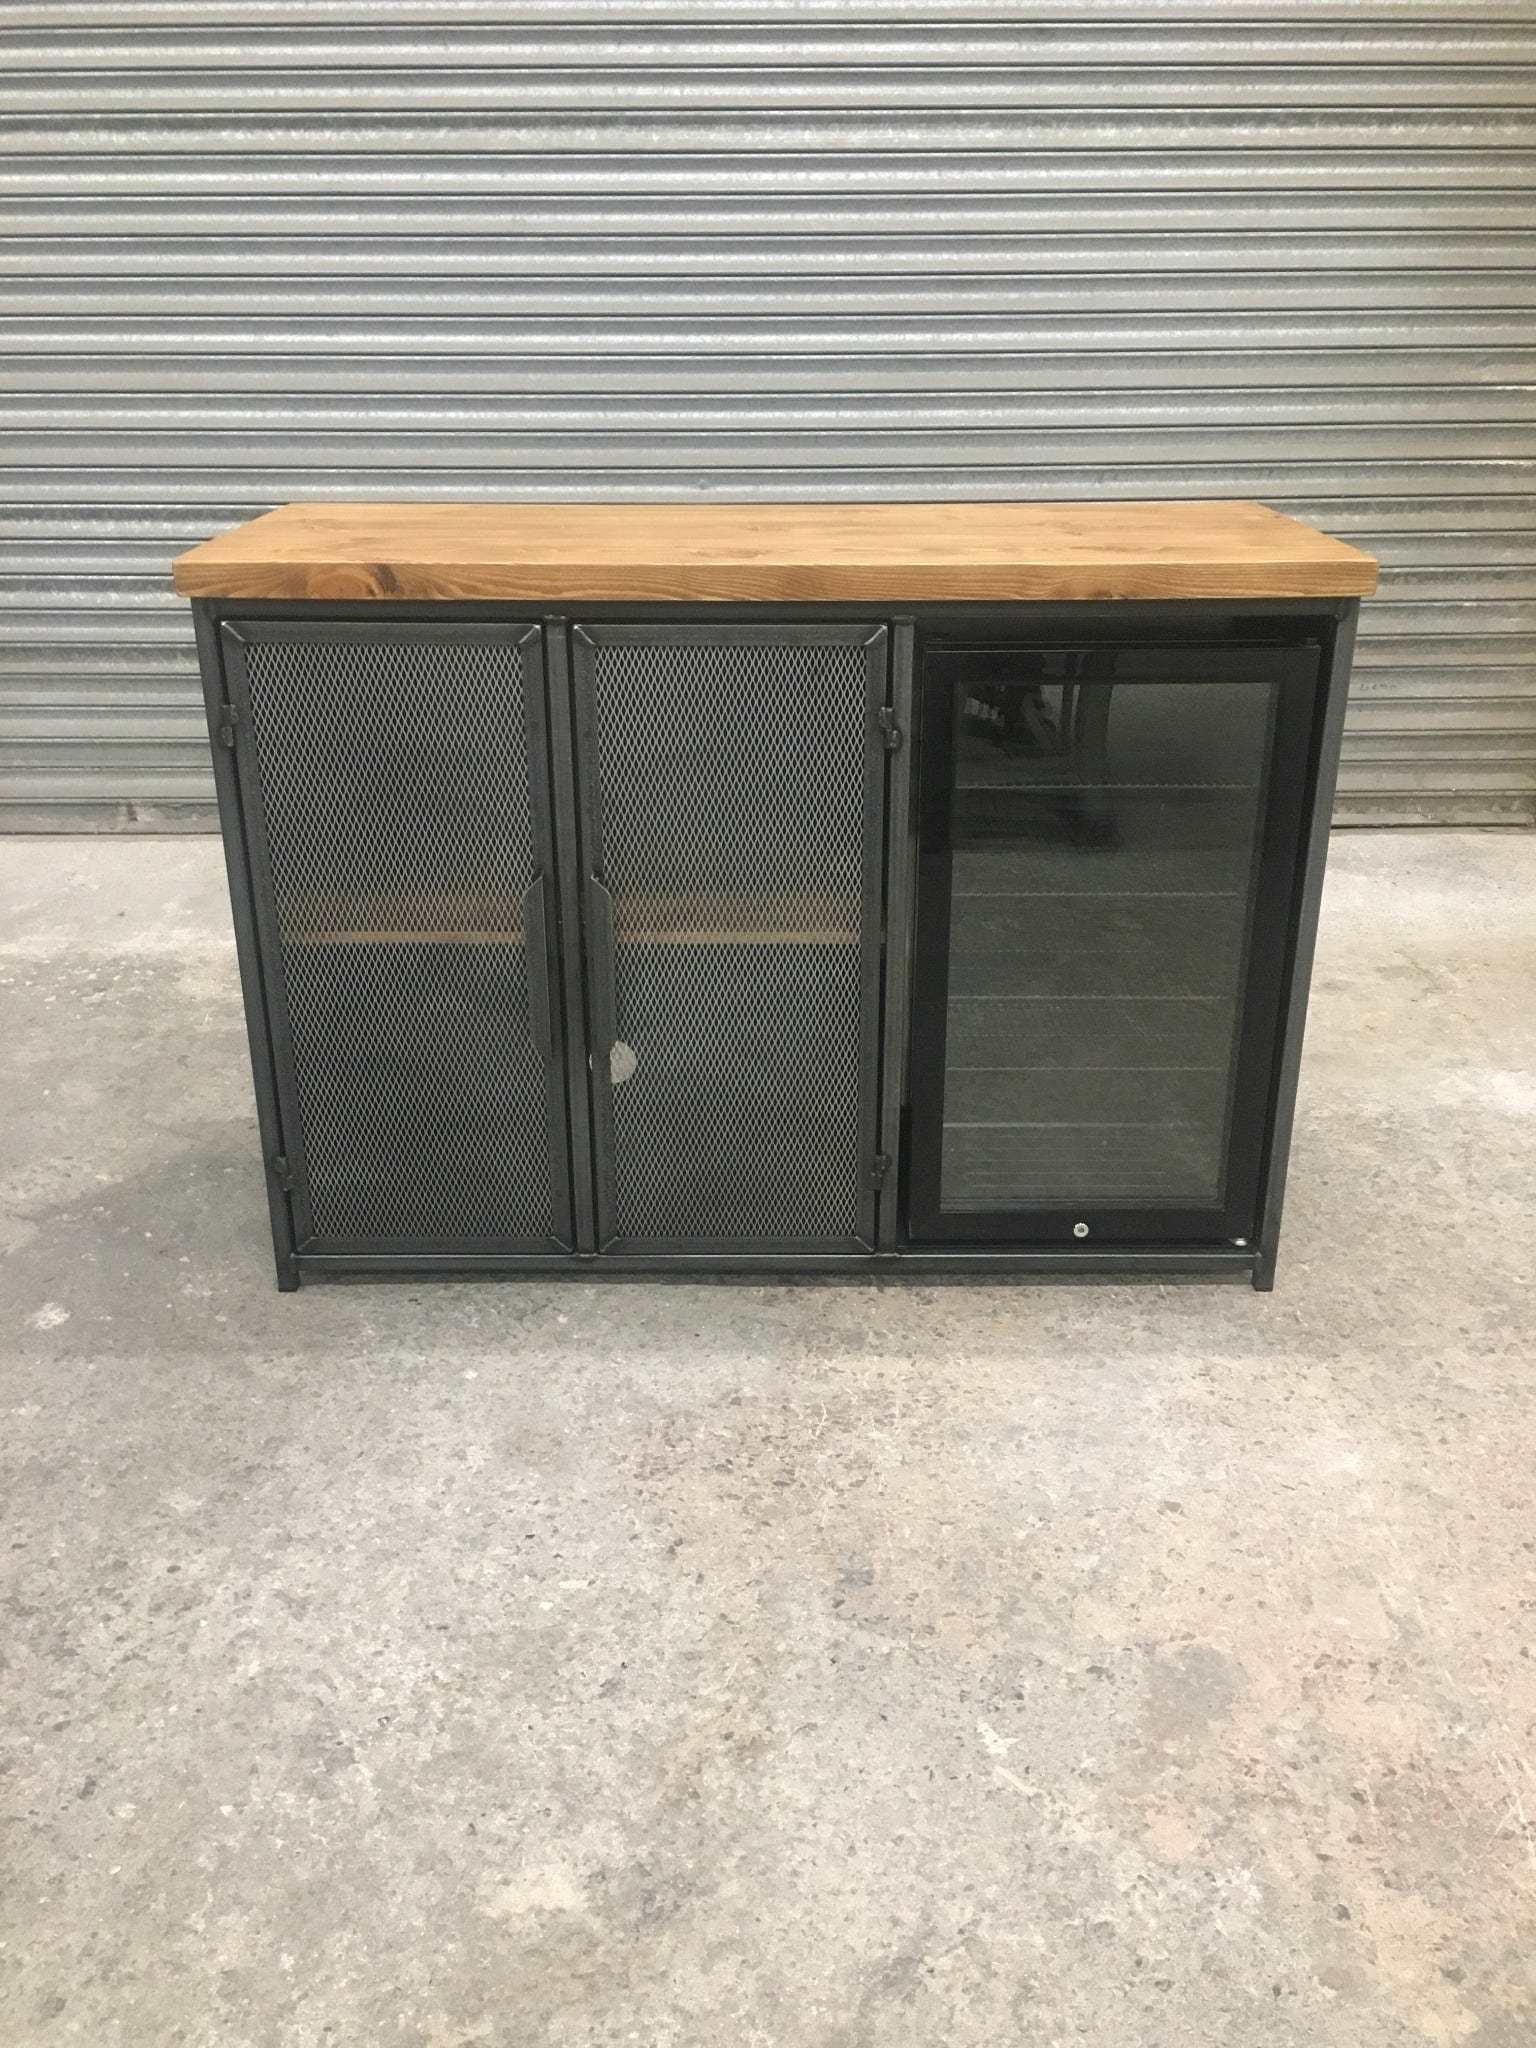 Industrial sideboard with fridge - Drinks Cabinet - Home Bar  RSD Furniture   